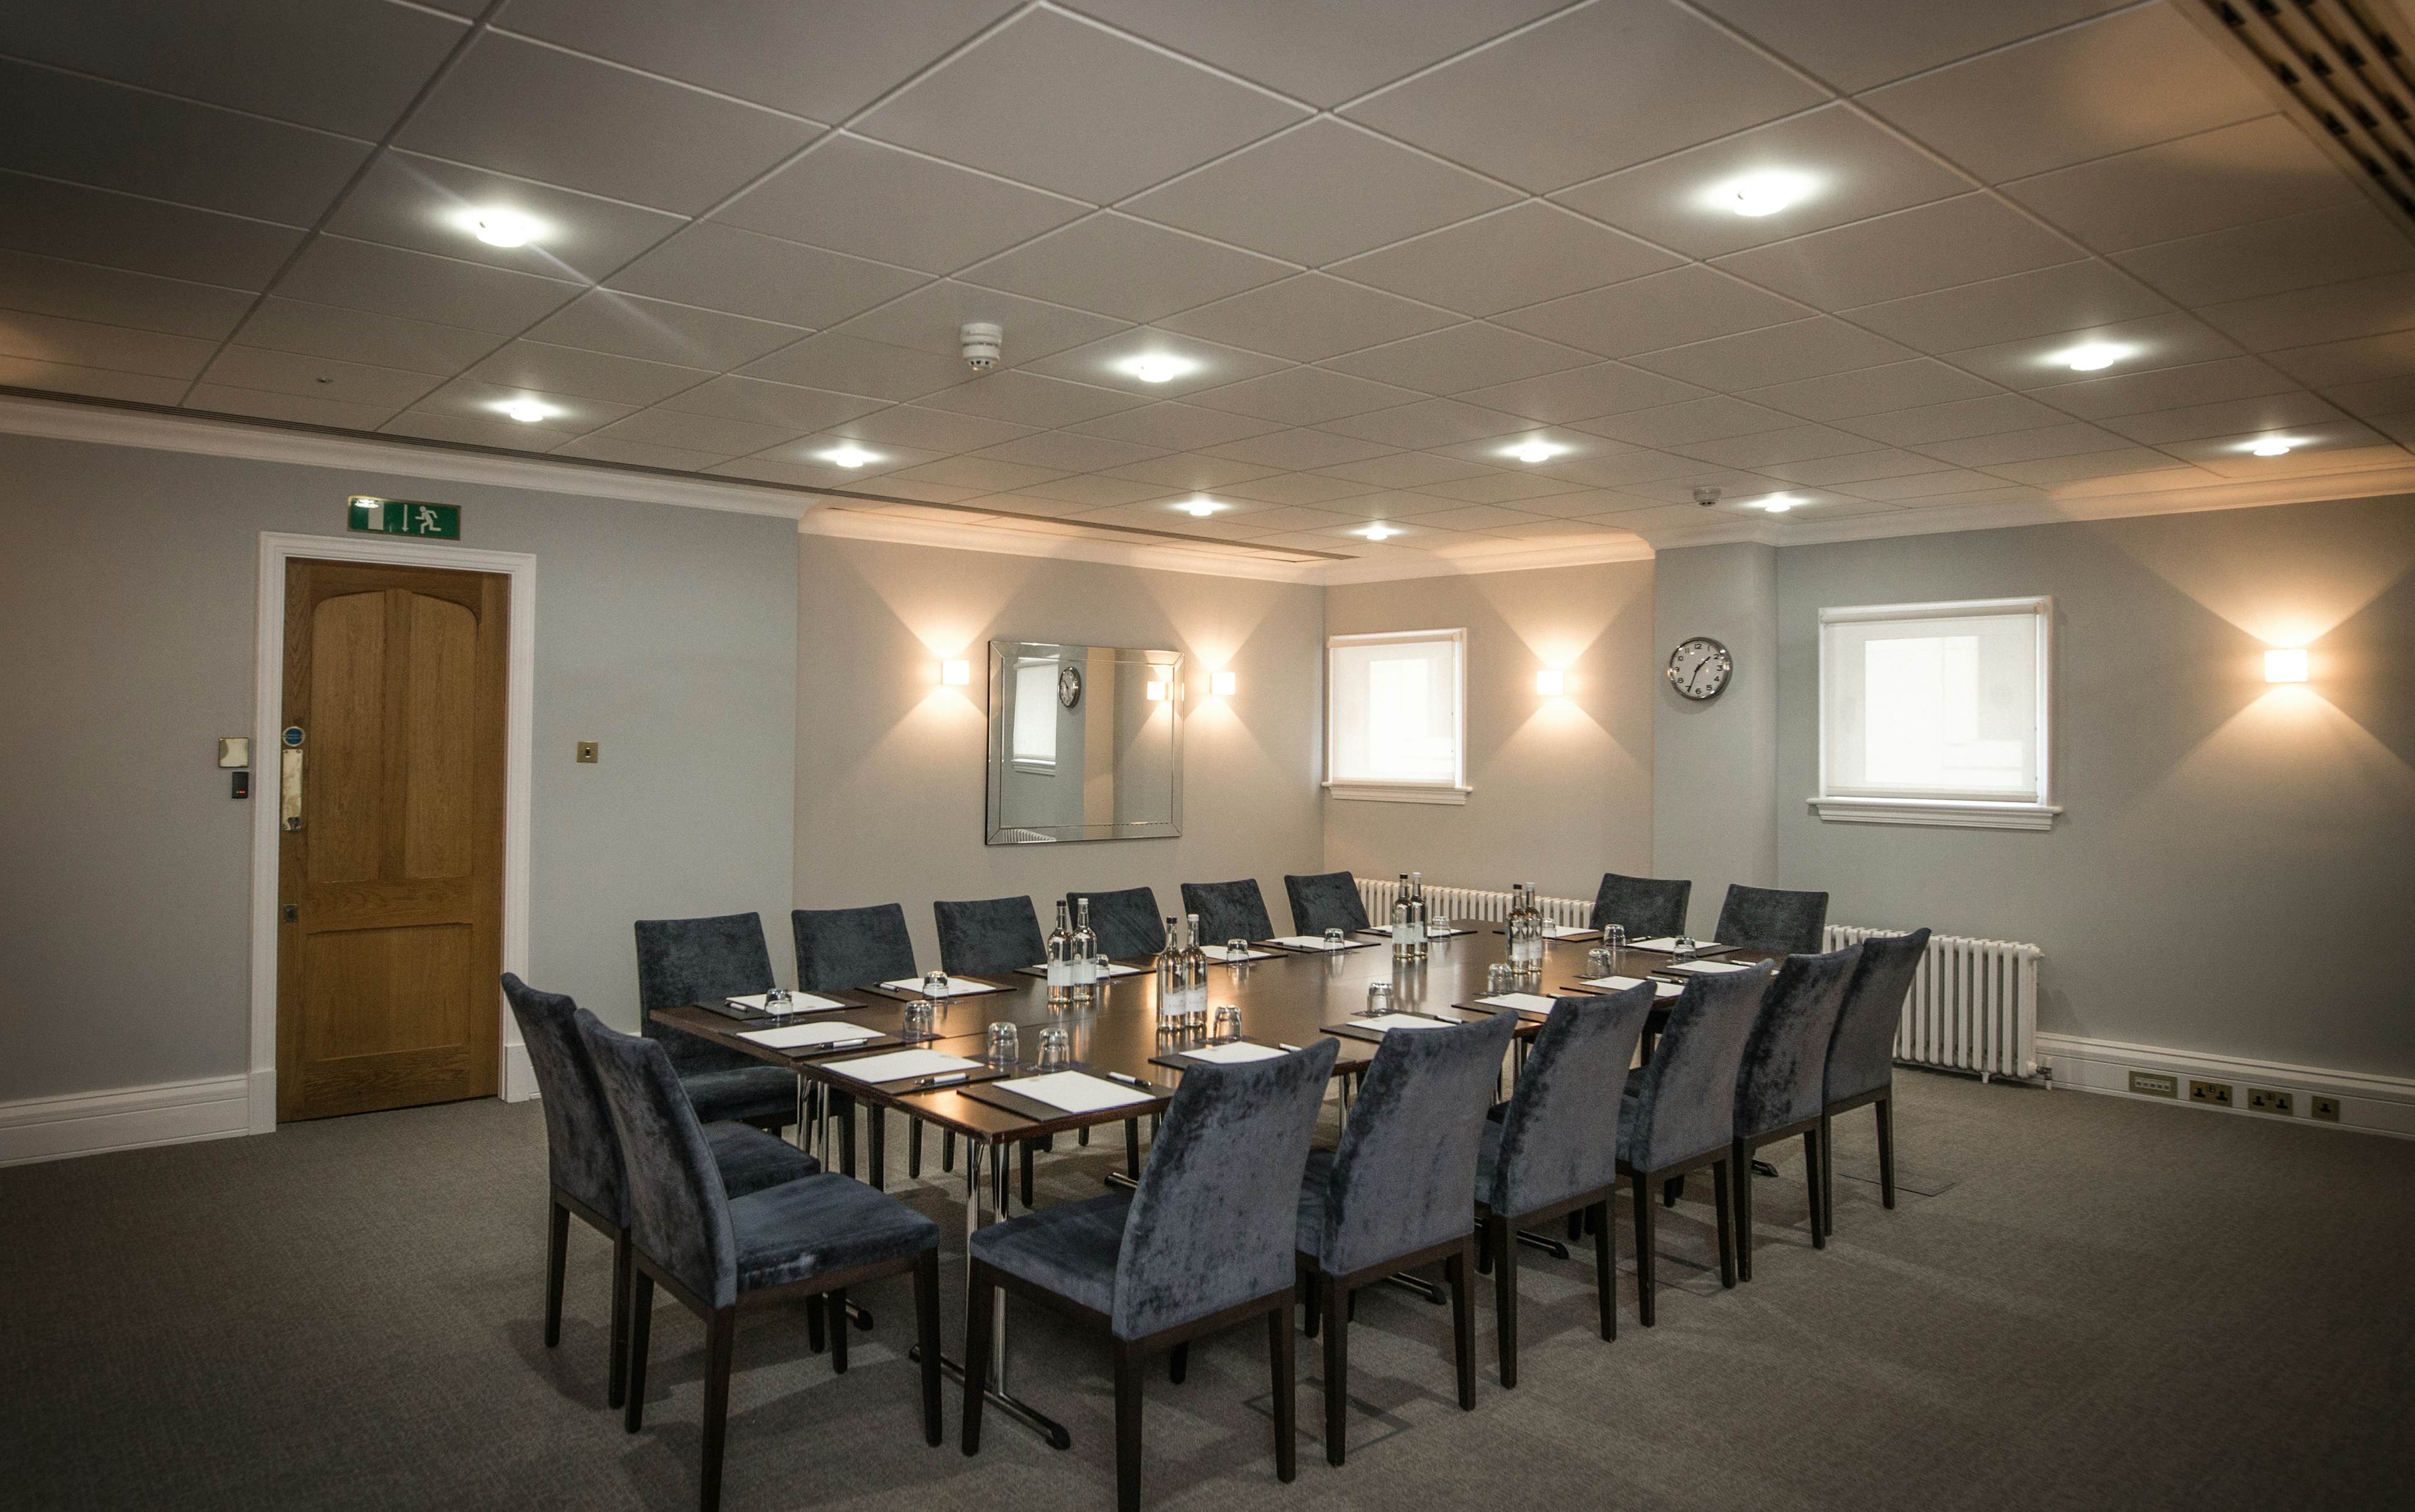 Arundel House - Council Room image 1